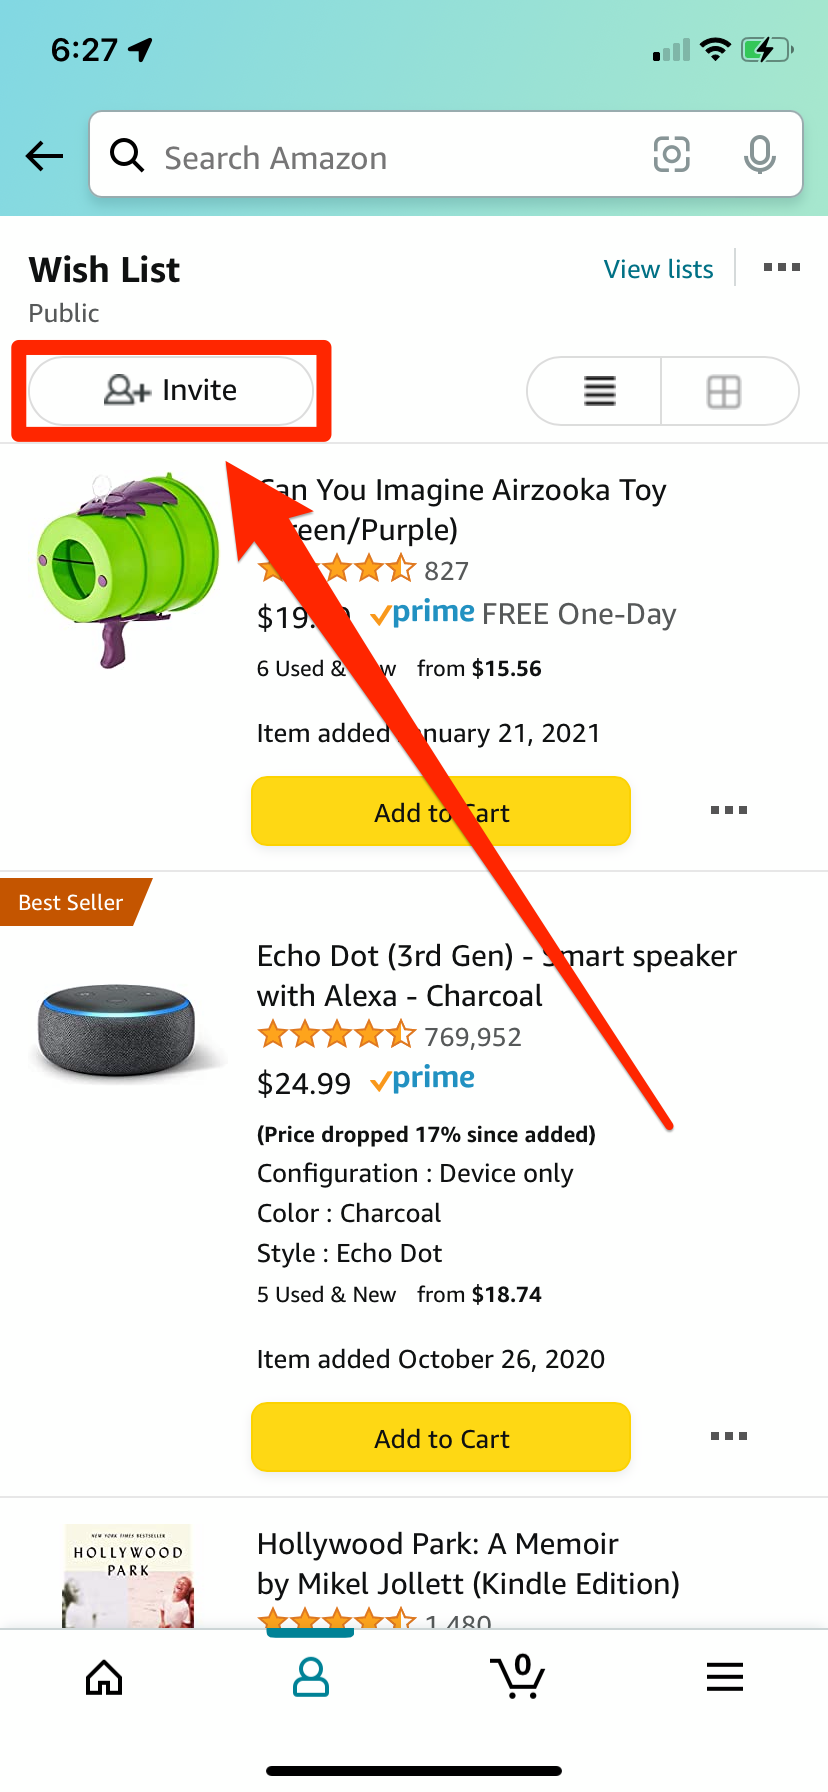 An Amazon Wish List in the Amazon iPhone app. The Invite option is highlighted.